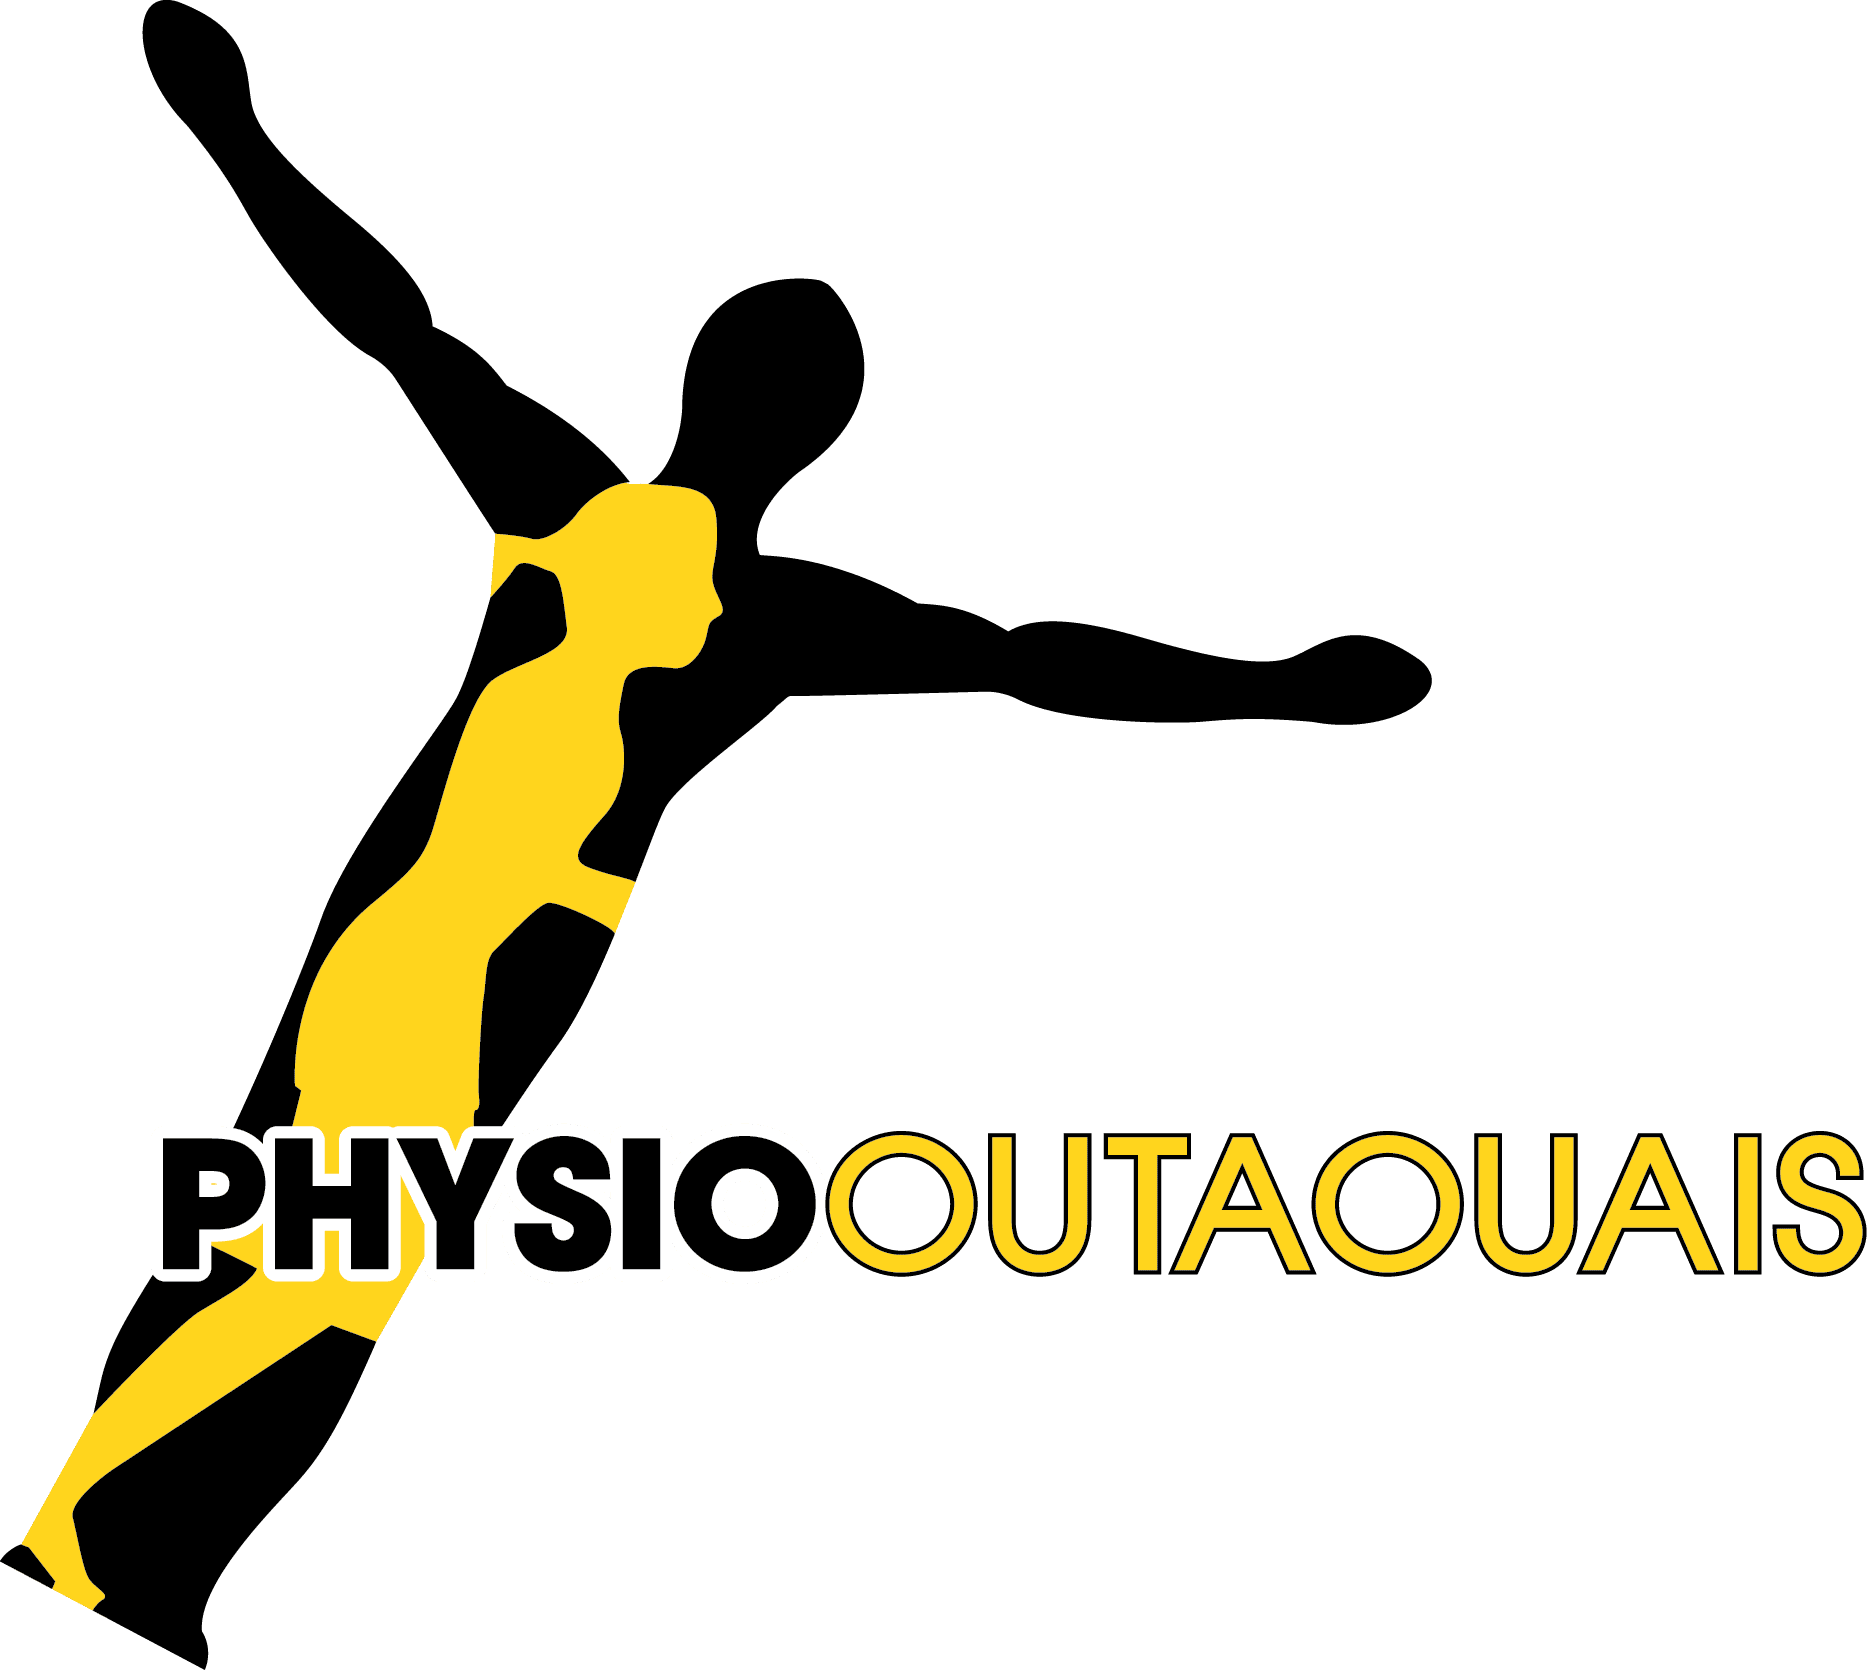 PhysioOutaouais joins national concussion care network